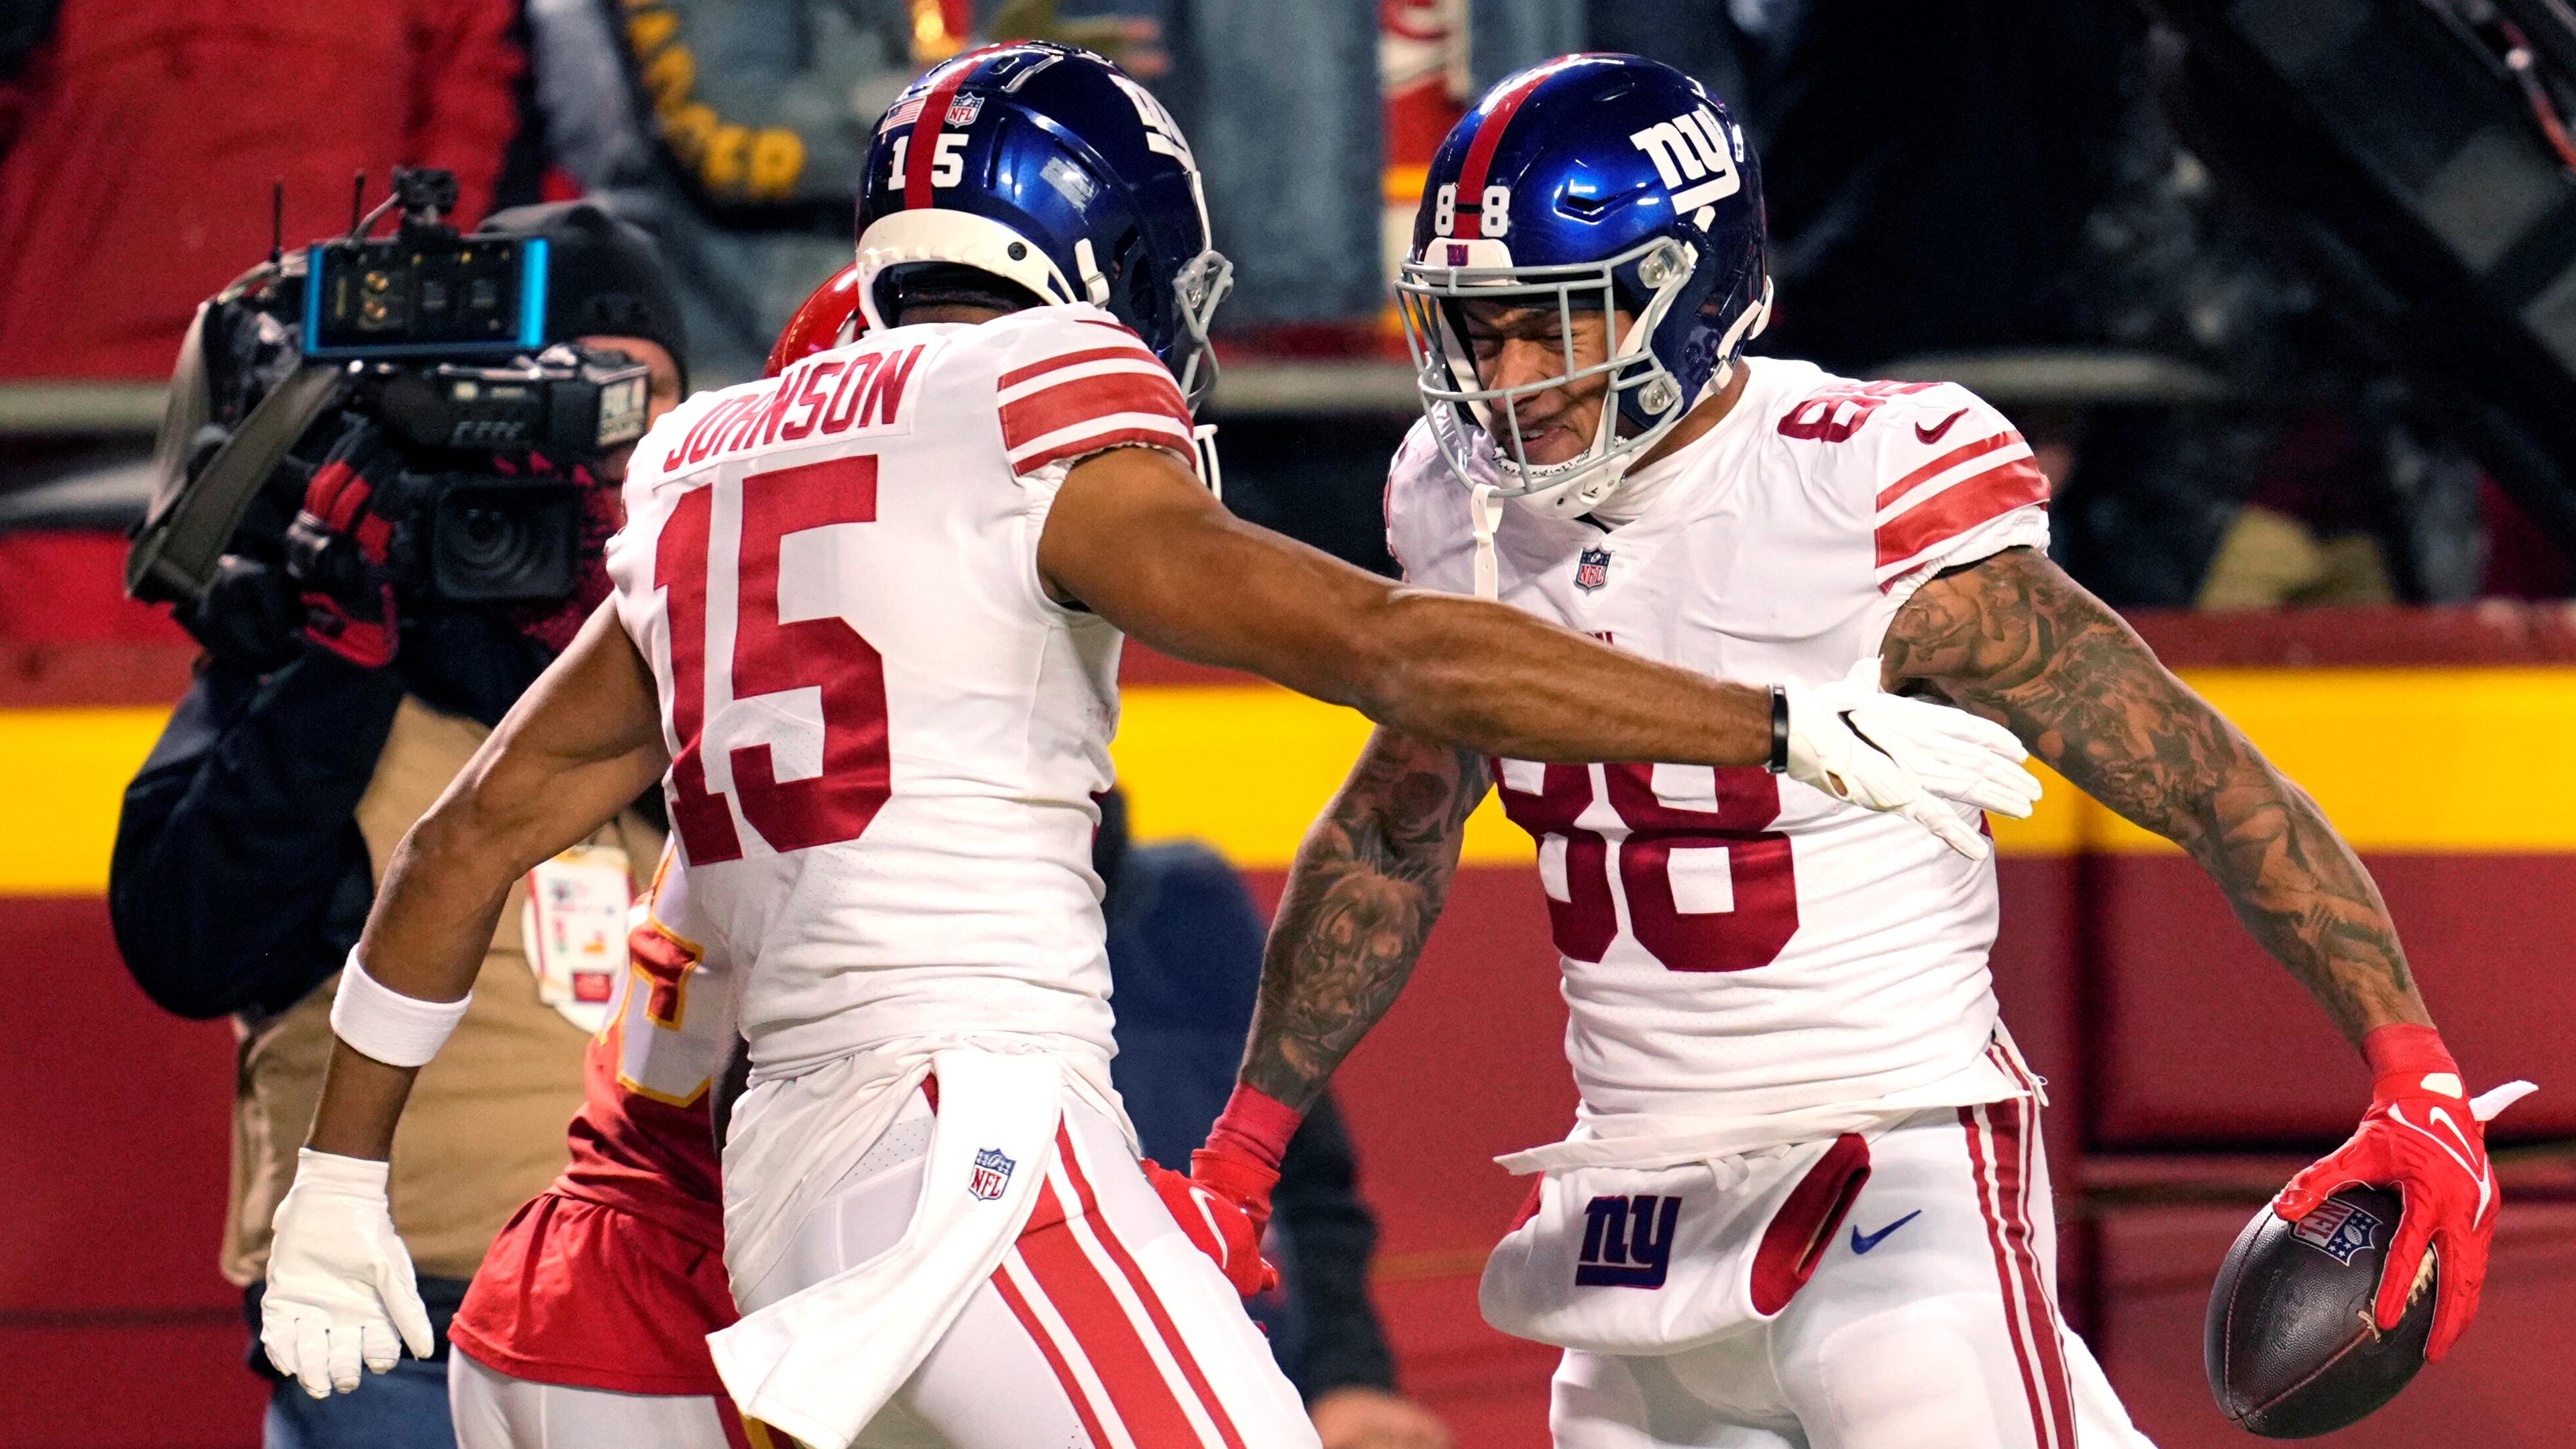 Nov 1, 2021; Kansas City, Missouri, USA; New York Giants tight end Evan Engram (88) celebrates with wide receiver Collin Johnson (15) after scoring a touchdown during the second half against the Kansas City Chiefs at GEHA Field at Arrowhead Stadium. Mandatory Credit: Jay Biggerstaff-USA TODAY Sports / Jay Biggerstaff-USA TODAY Sports